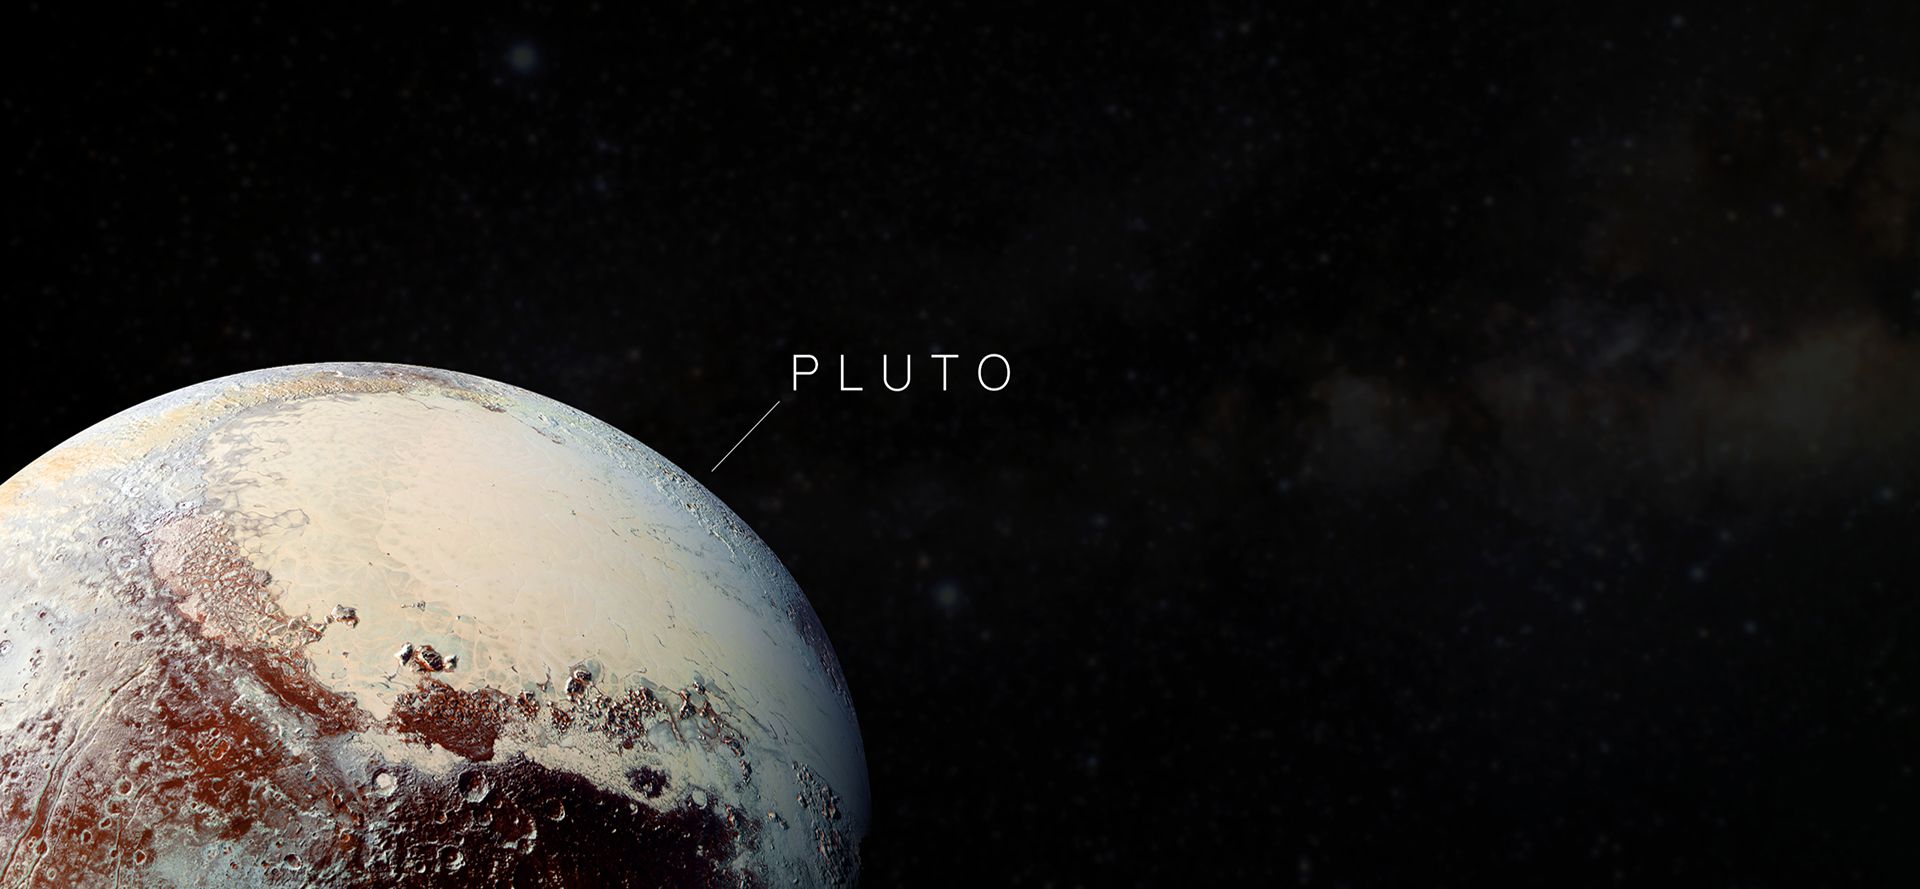 Pluto in the tenth house.